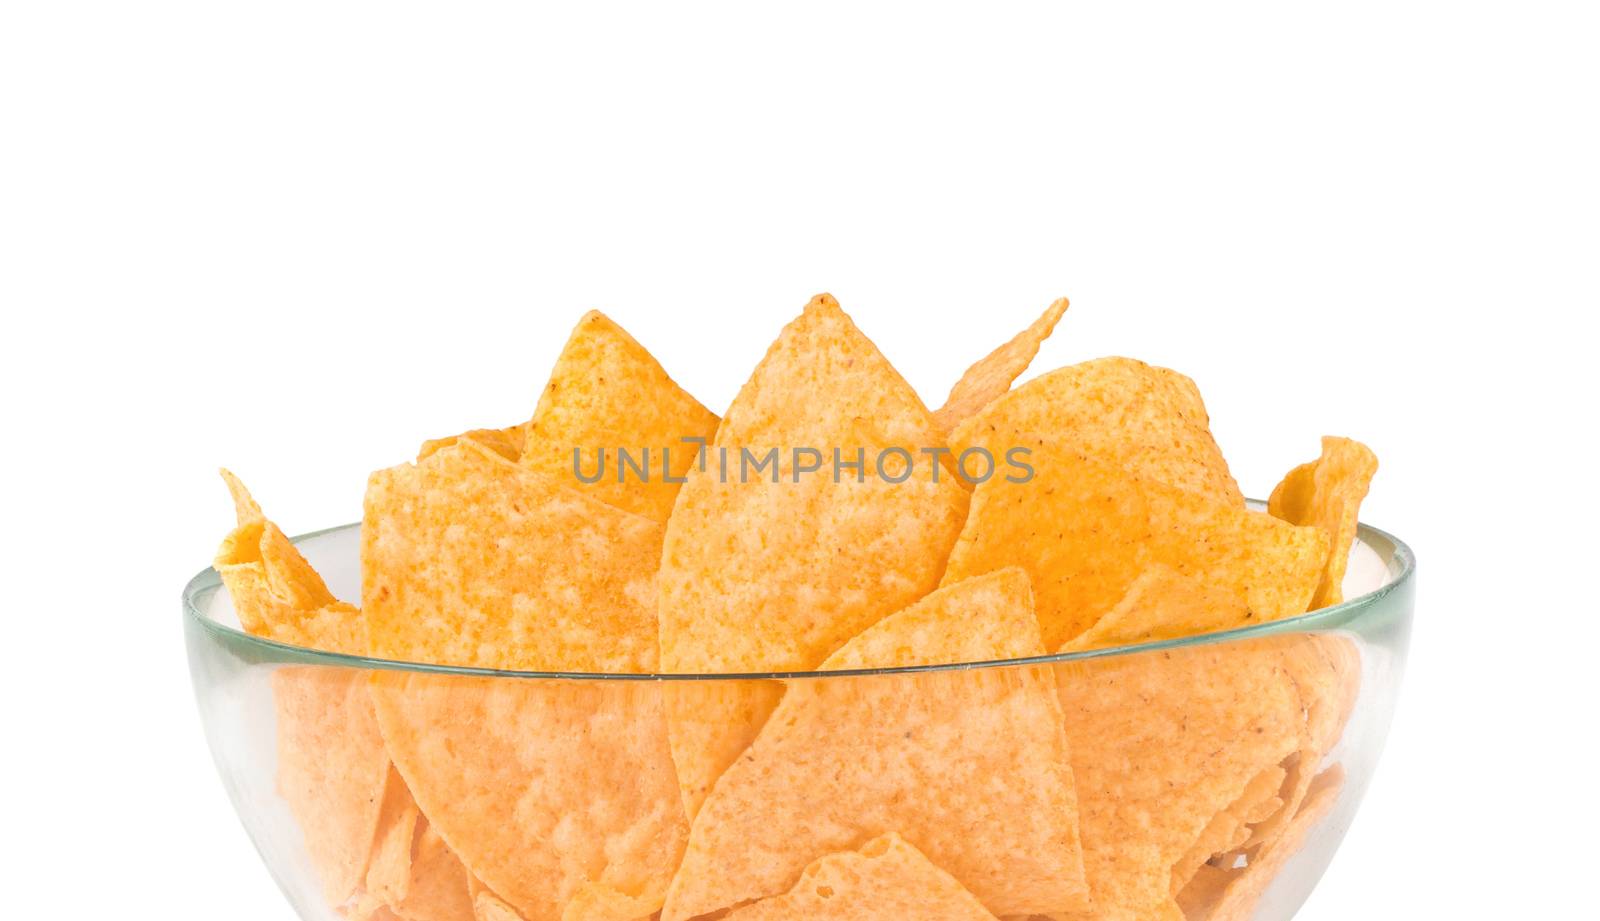 the nachos chips in bowl on white background